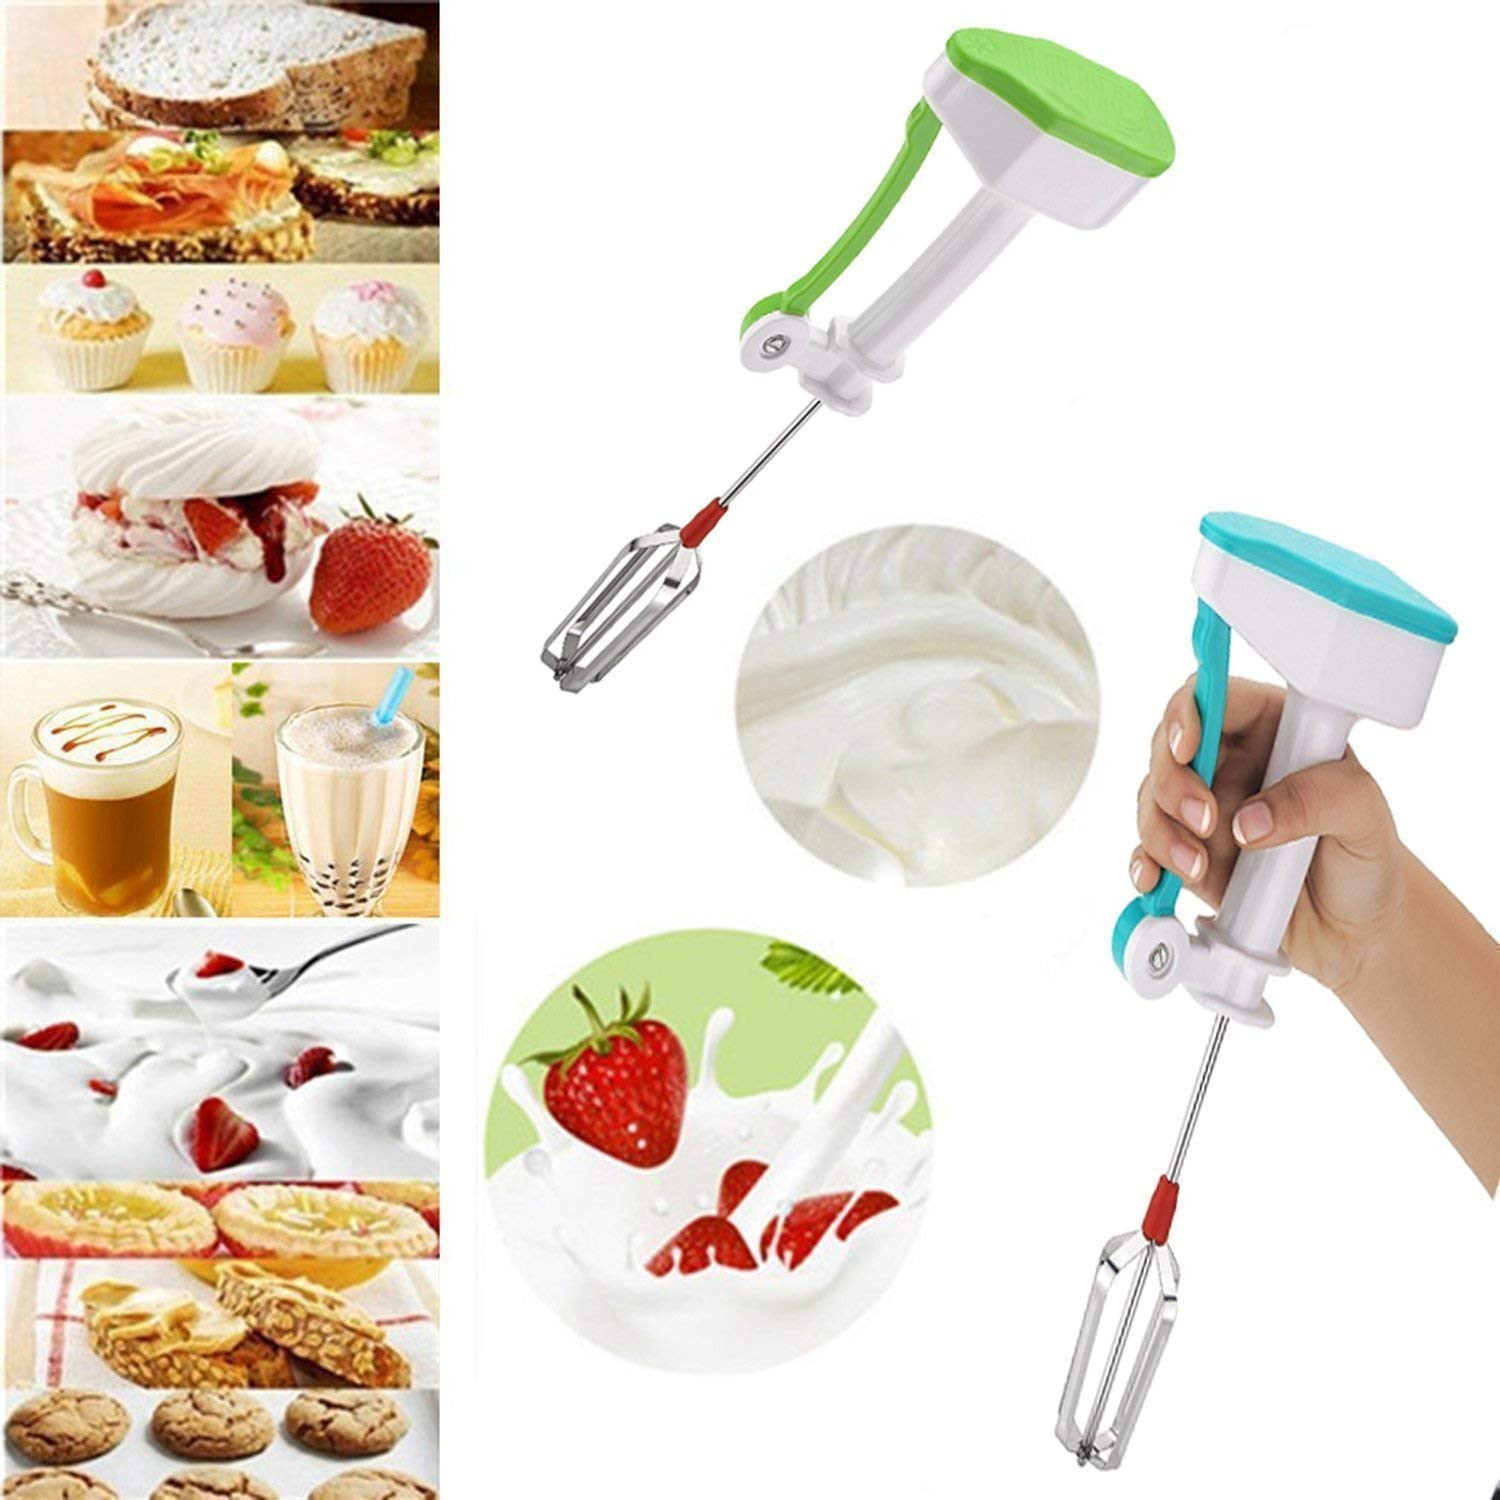 Kuber Industries Power-Free HAnd Blender And Beater In Kitchen Appliances With High Speed Operation (Egg And Cream; Milkshake; Soup; Lassi; Butter Milk Maker) (Multi)